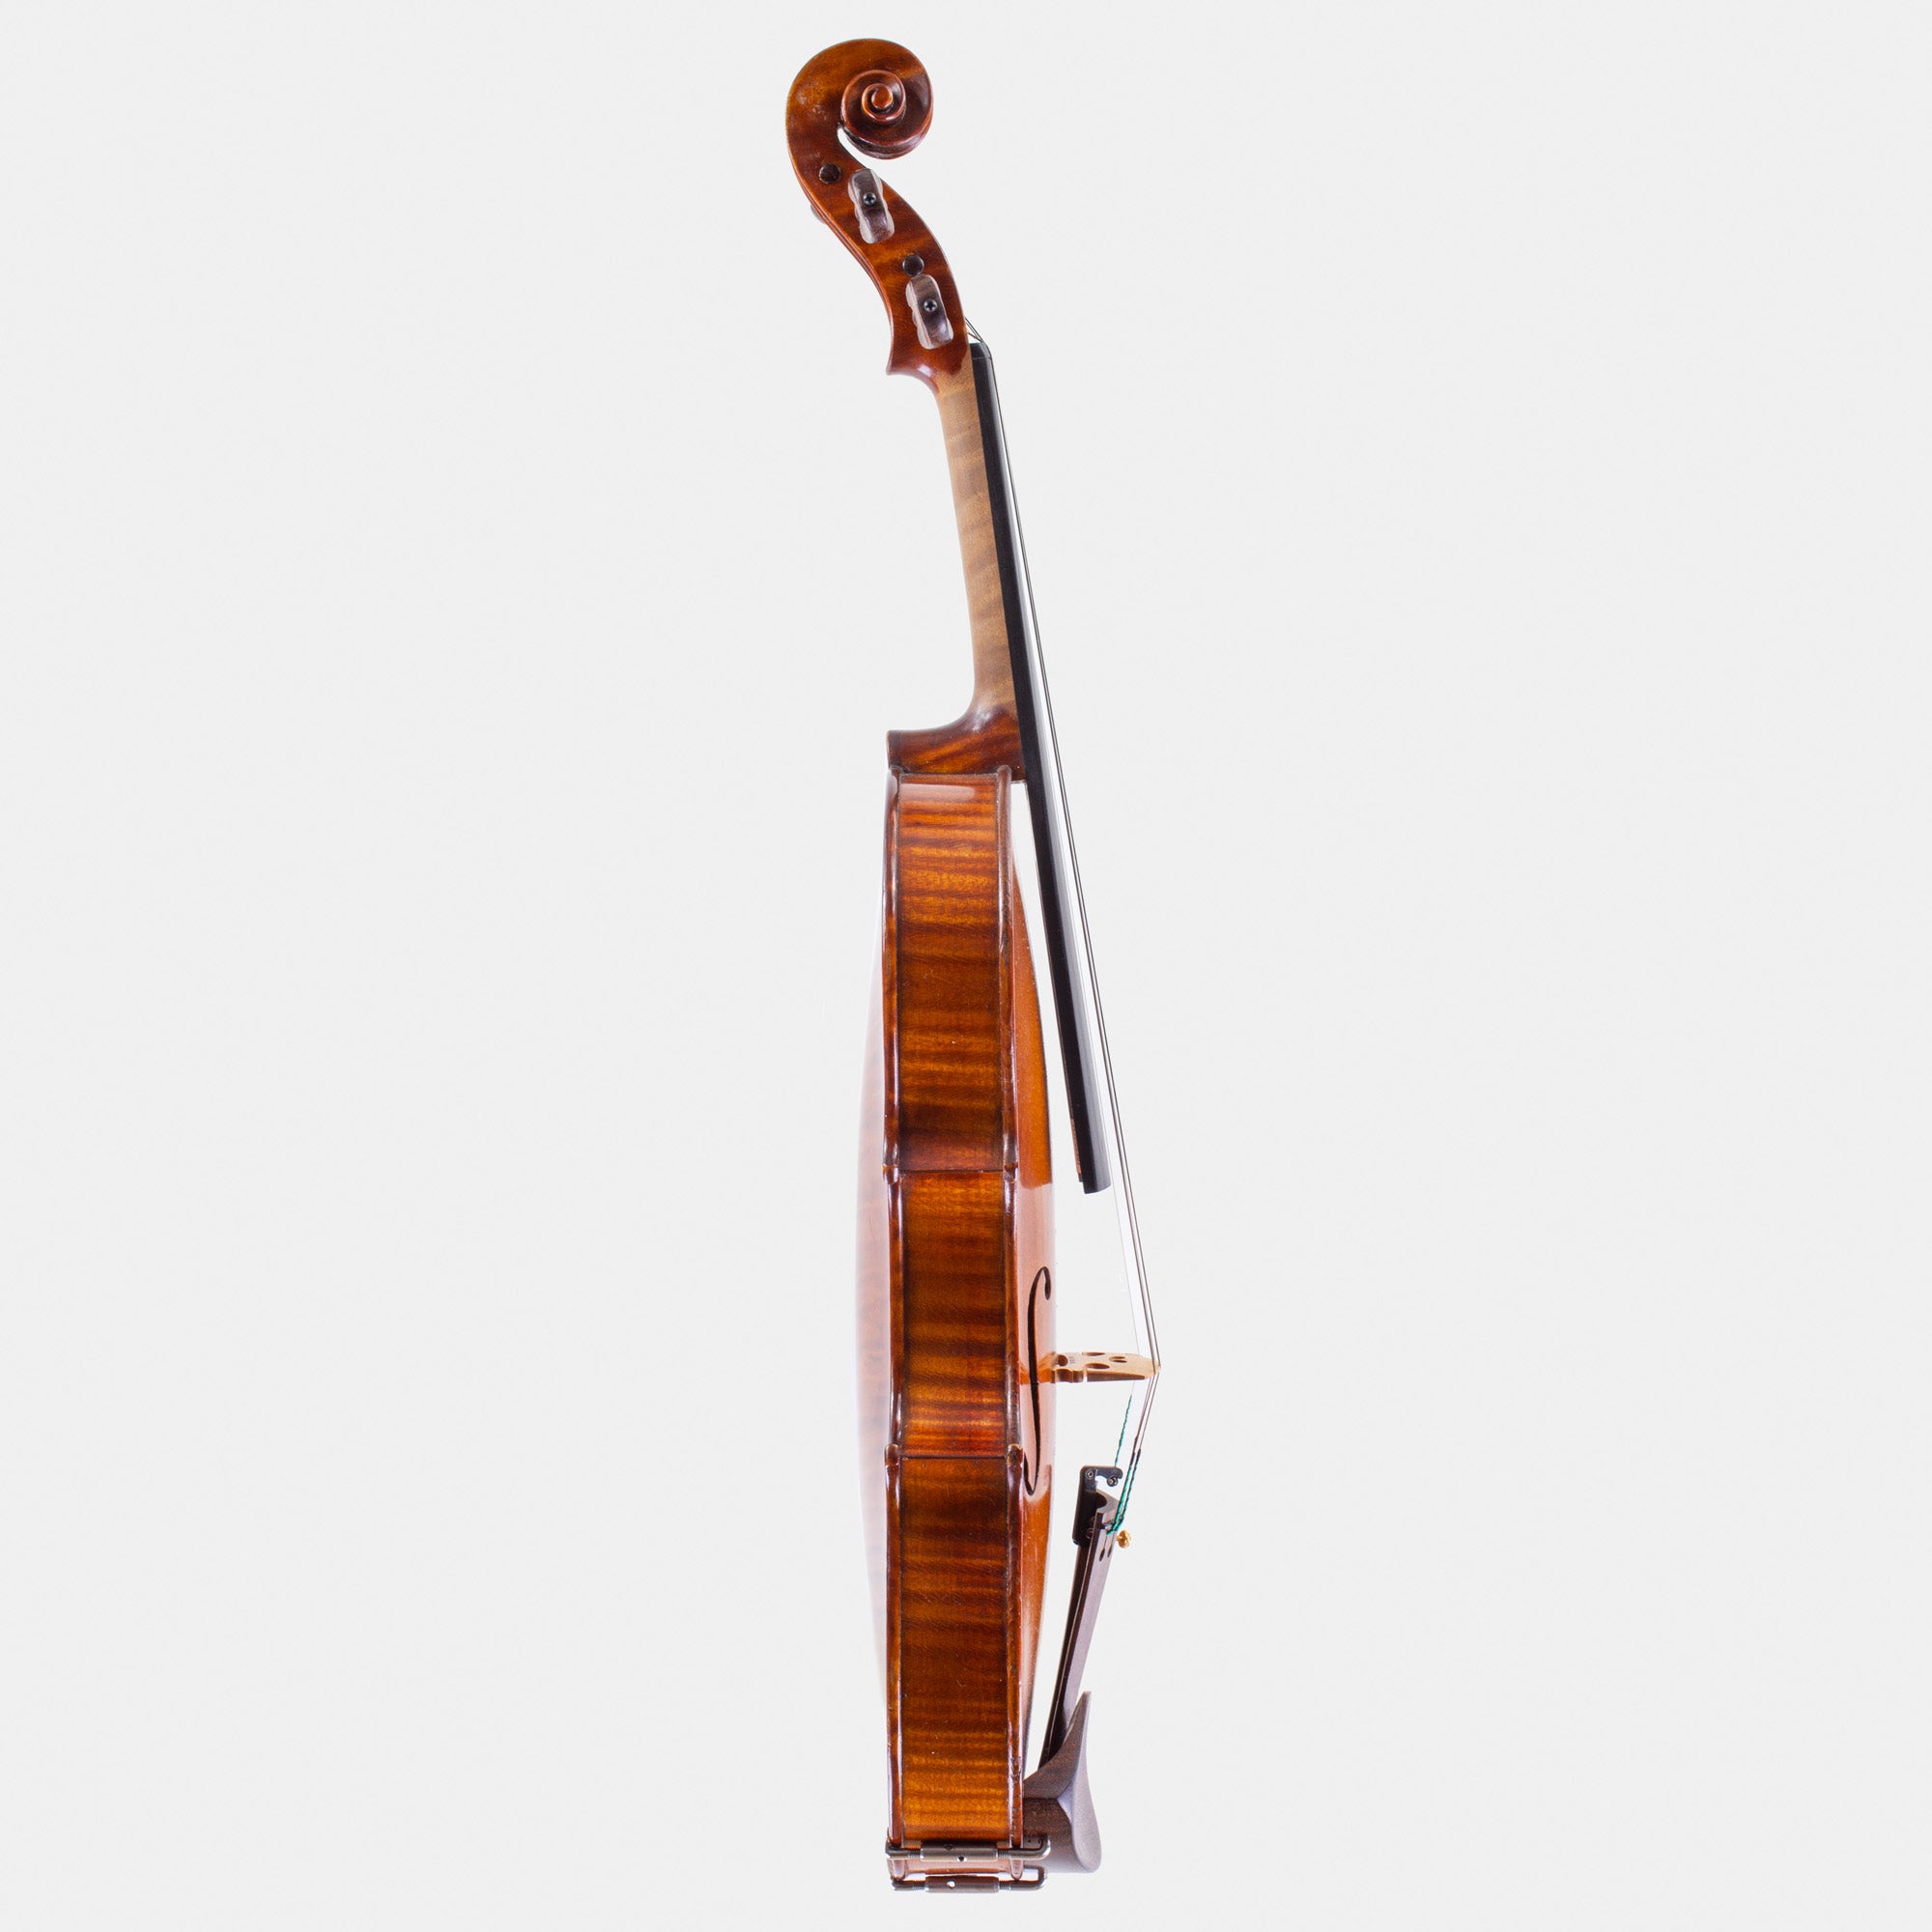 Violin by Frederick William Chanot, London, 1905